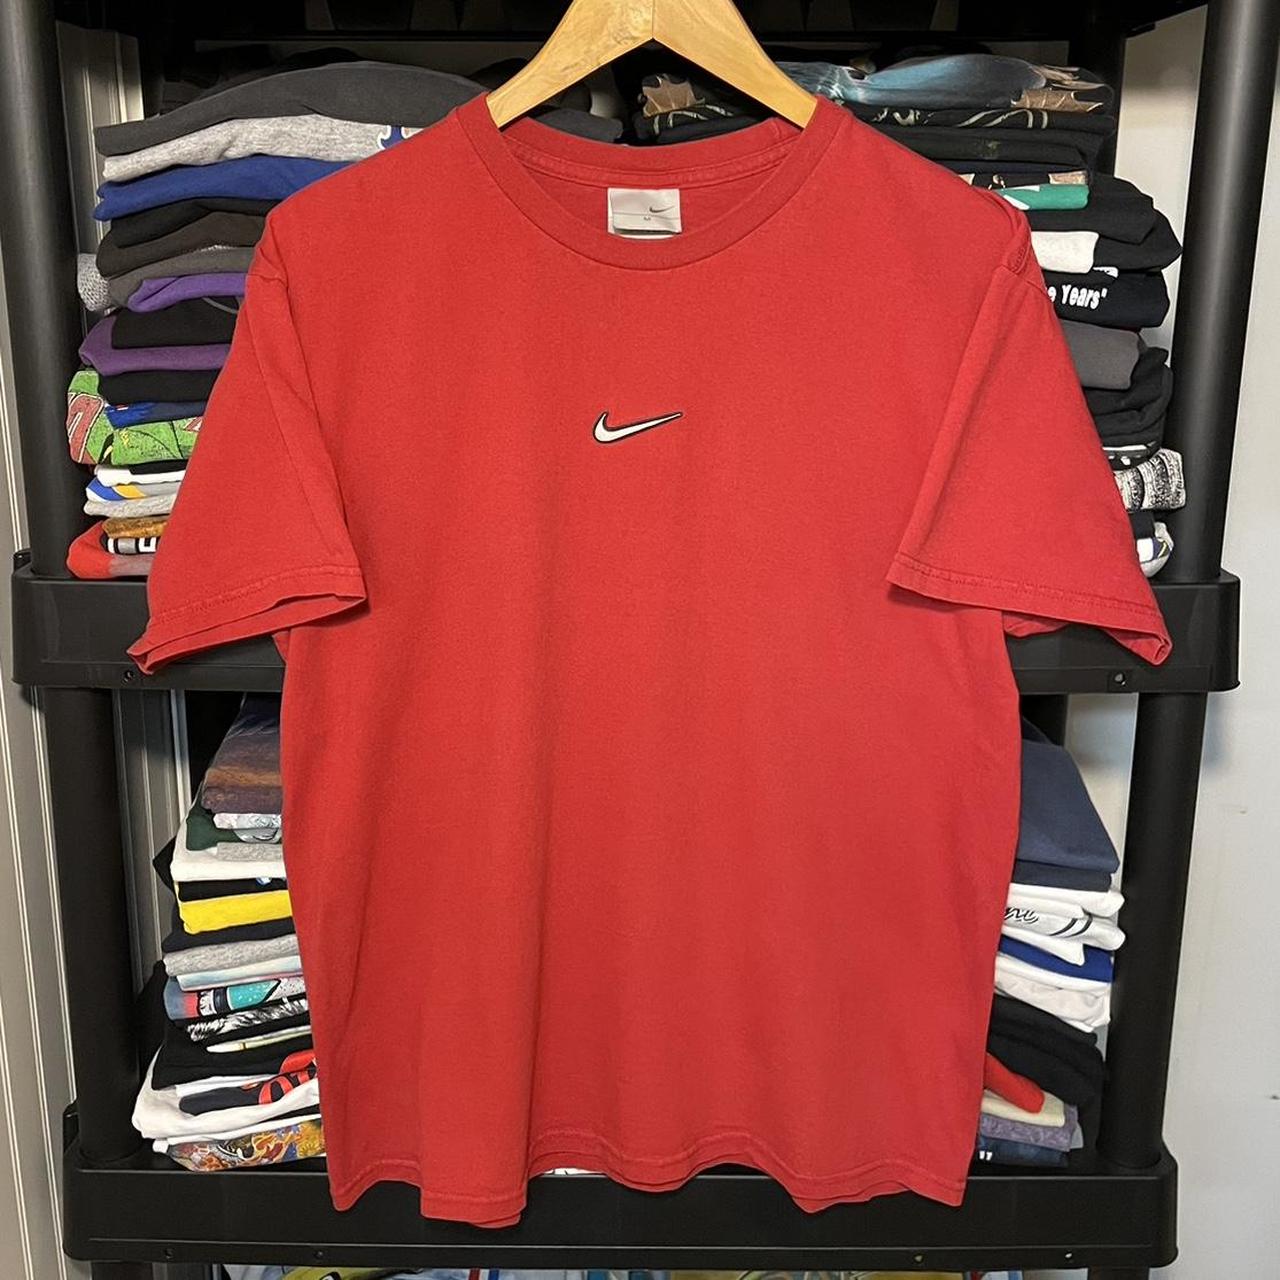 Nike Men's Red and Silver T-shirt | Depop